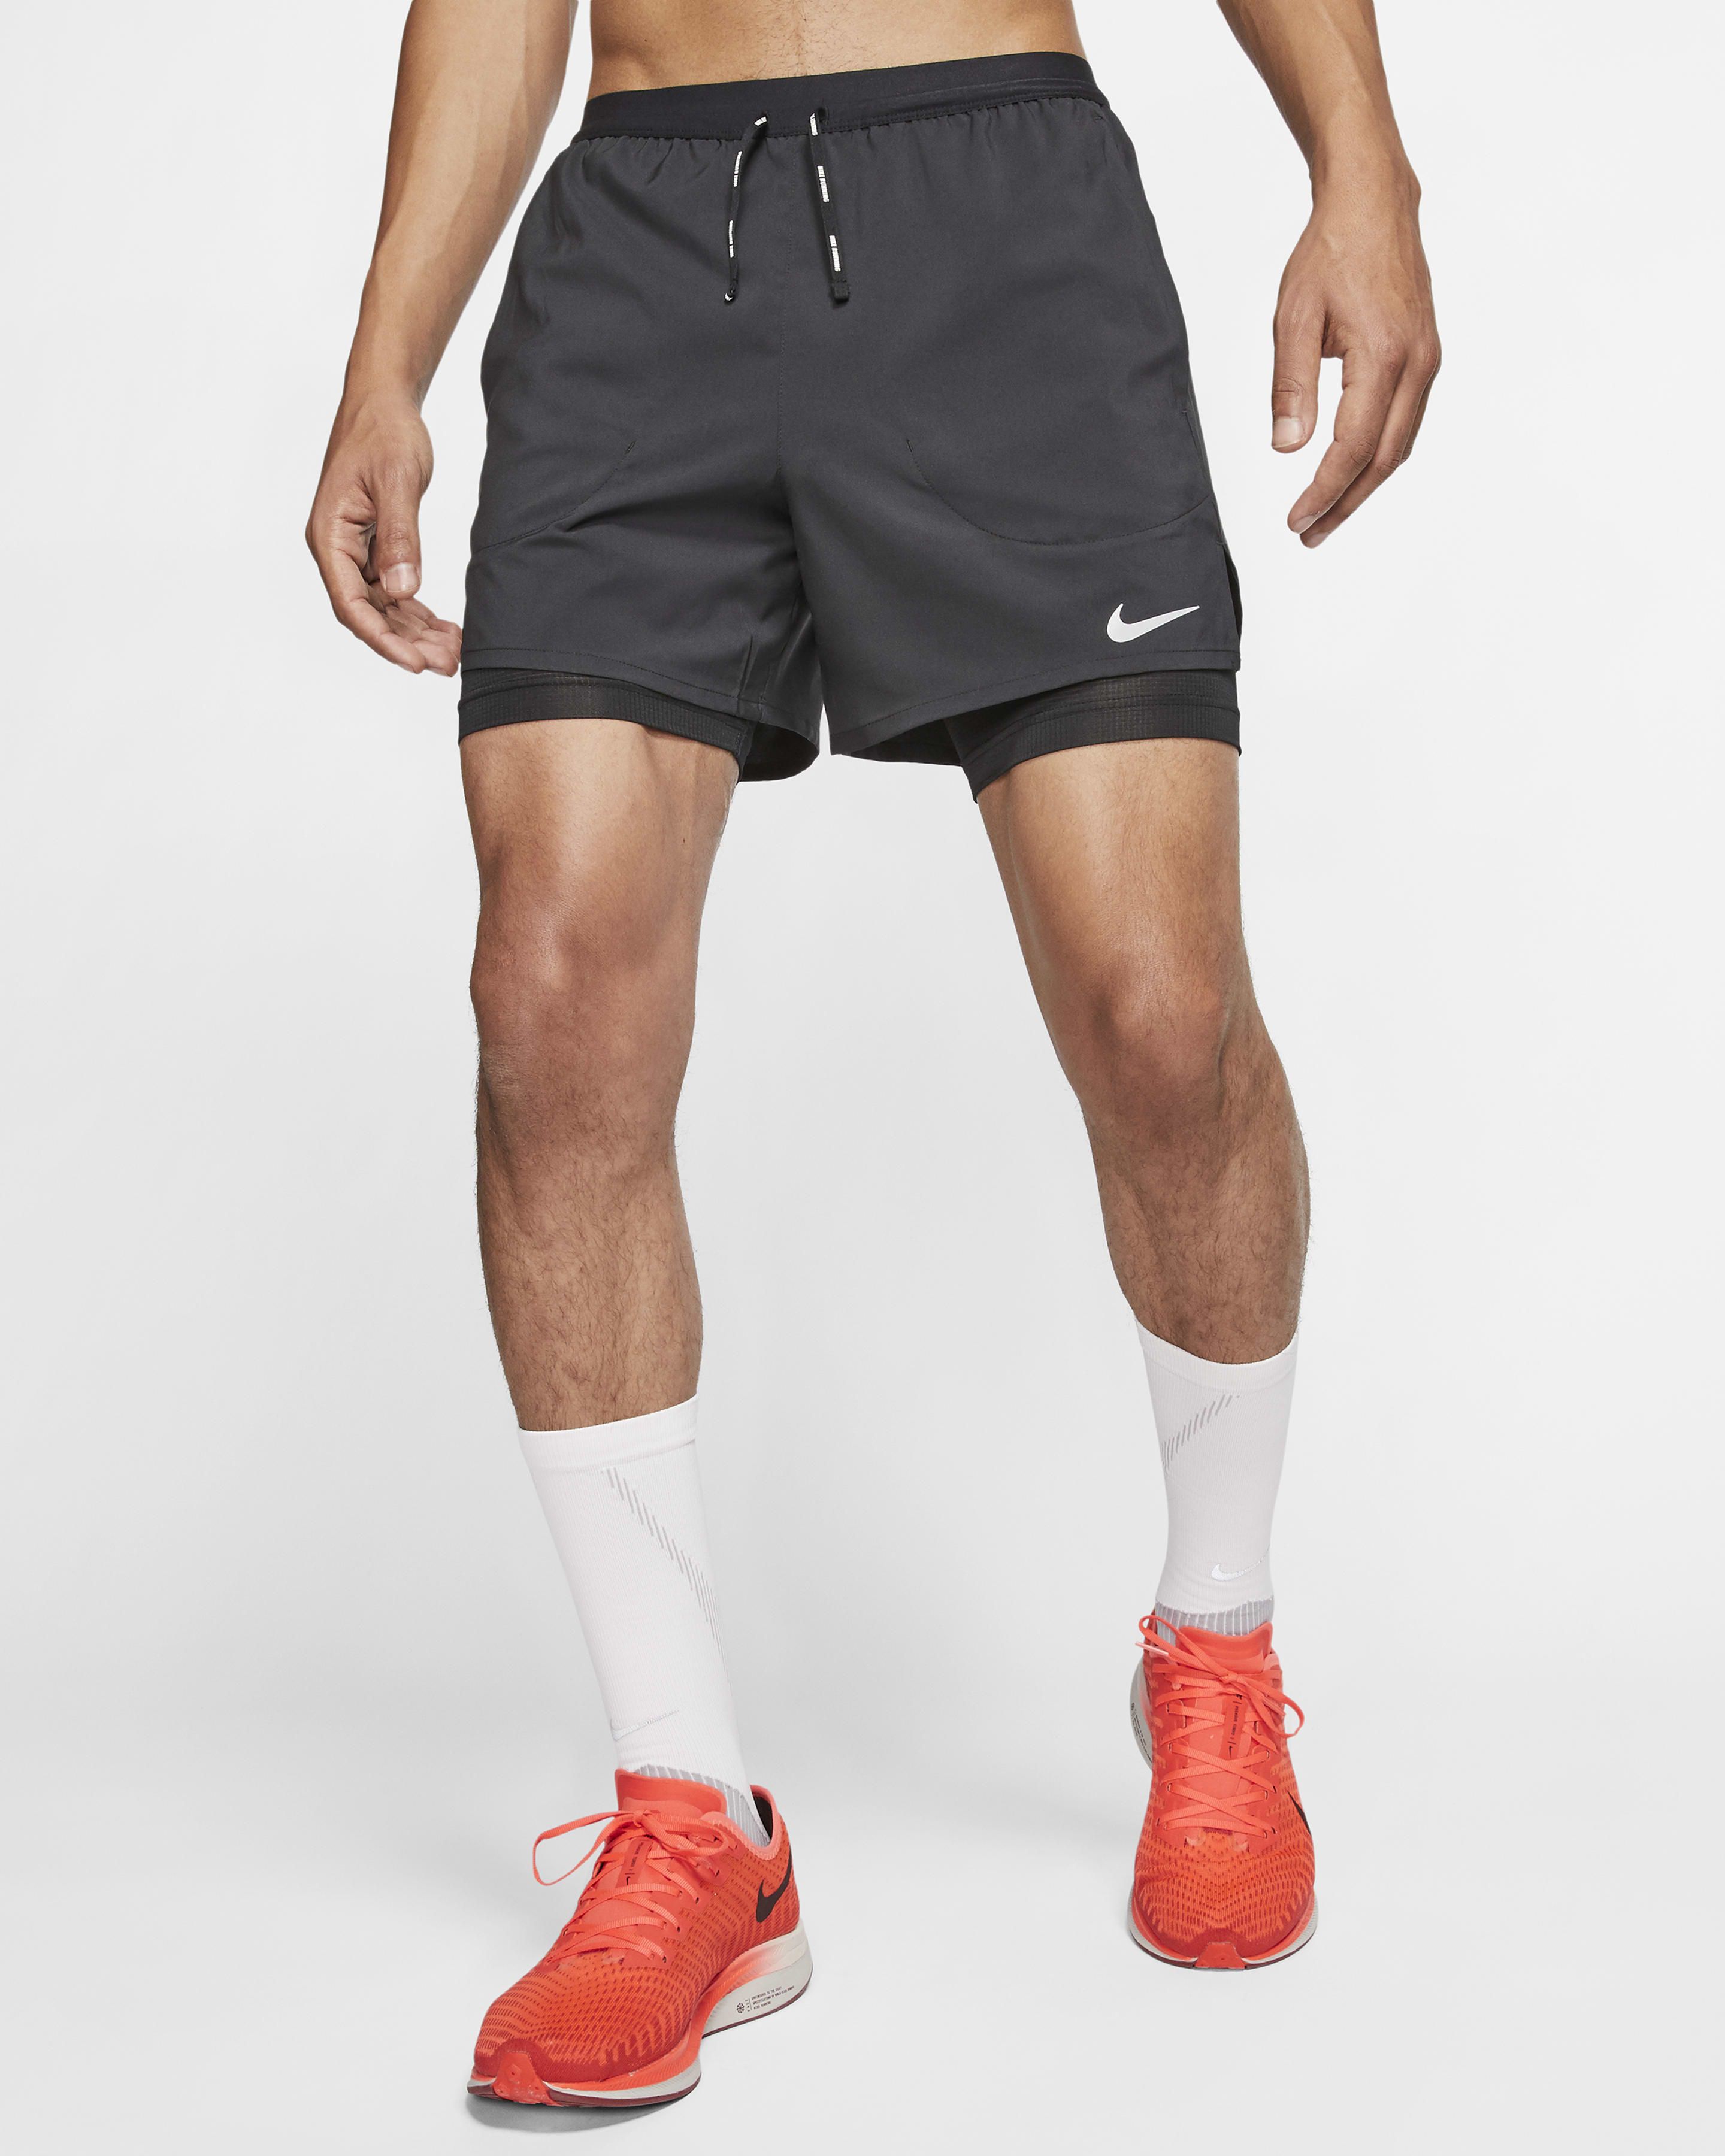 Buy > nike mens workout shorts > in stock